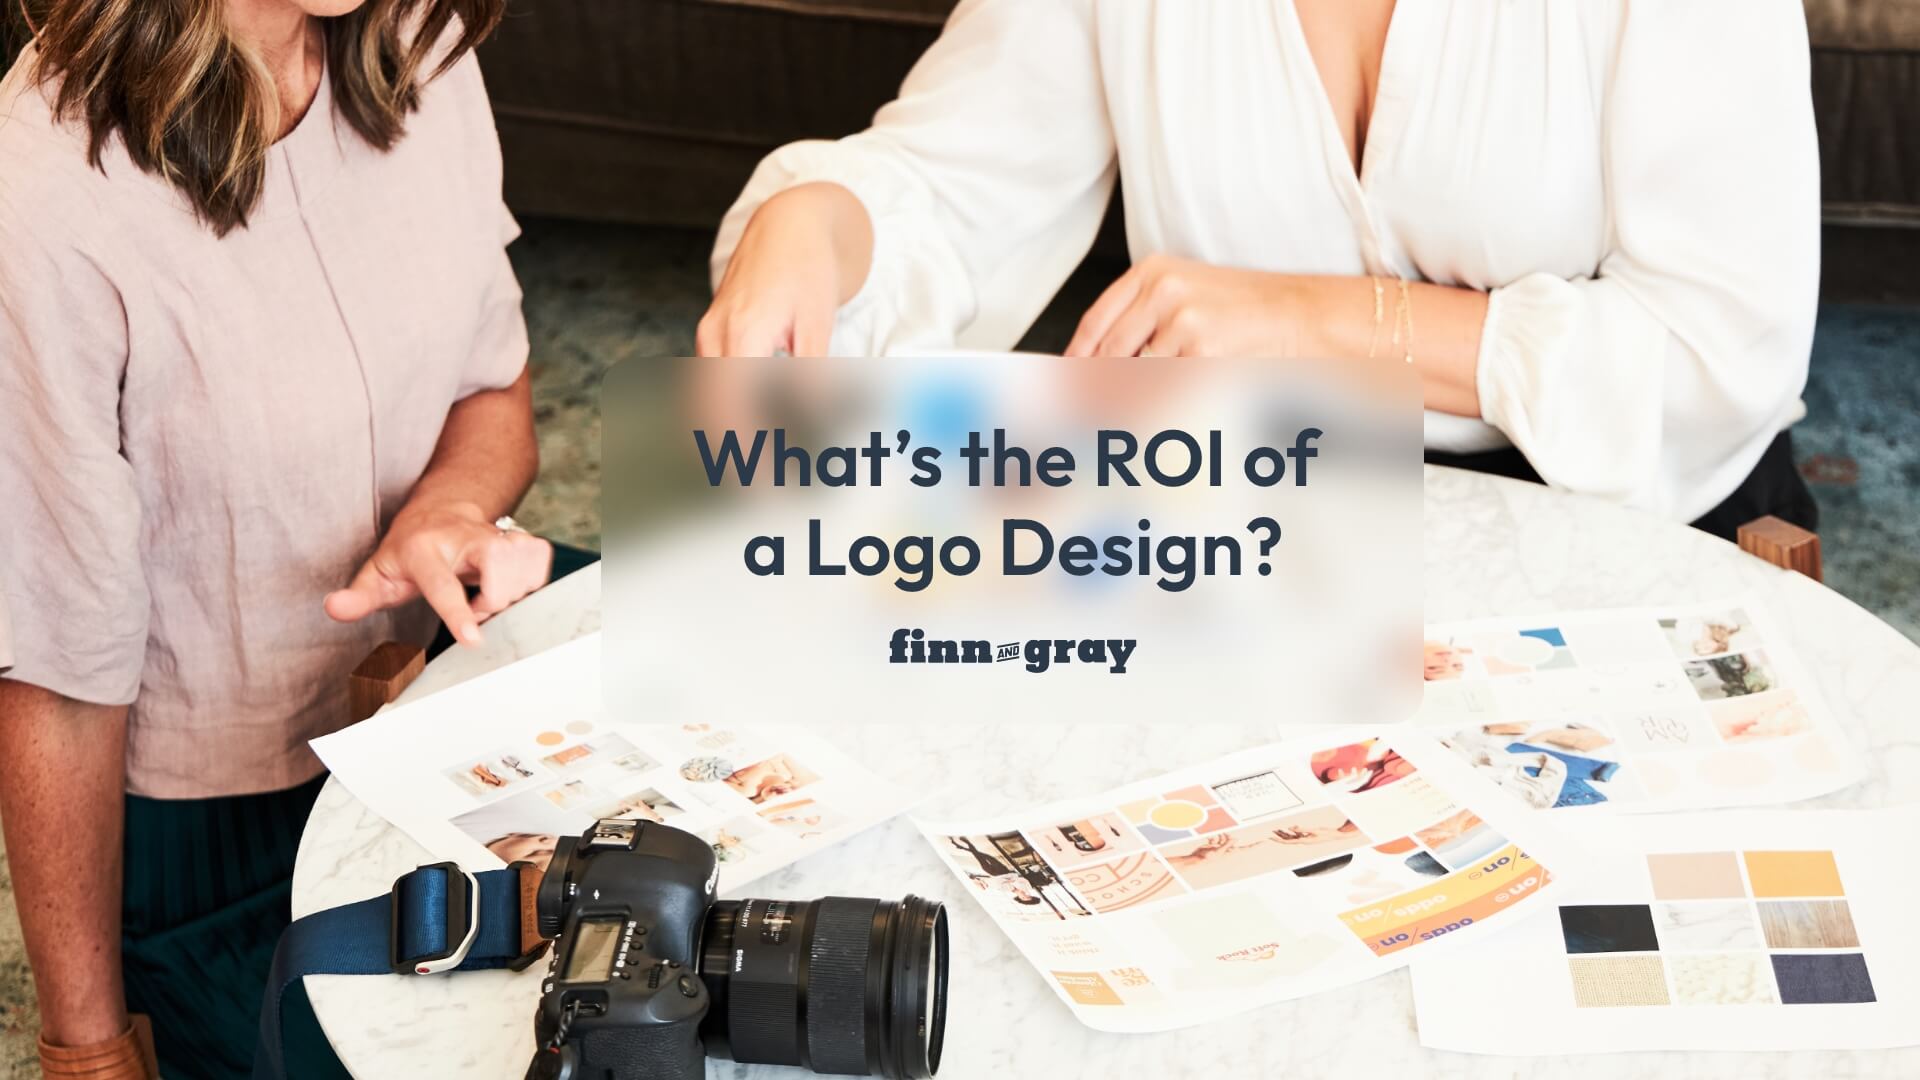 what's the roi of a logo design - question on photo of two women organizing papers